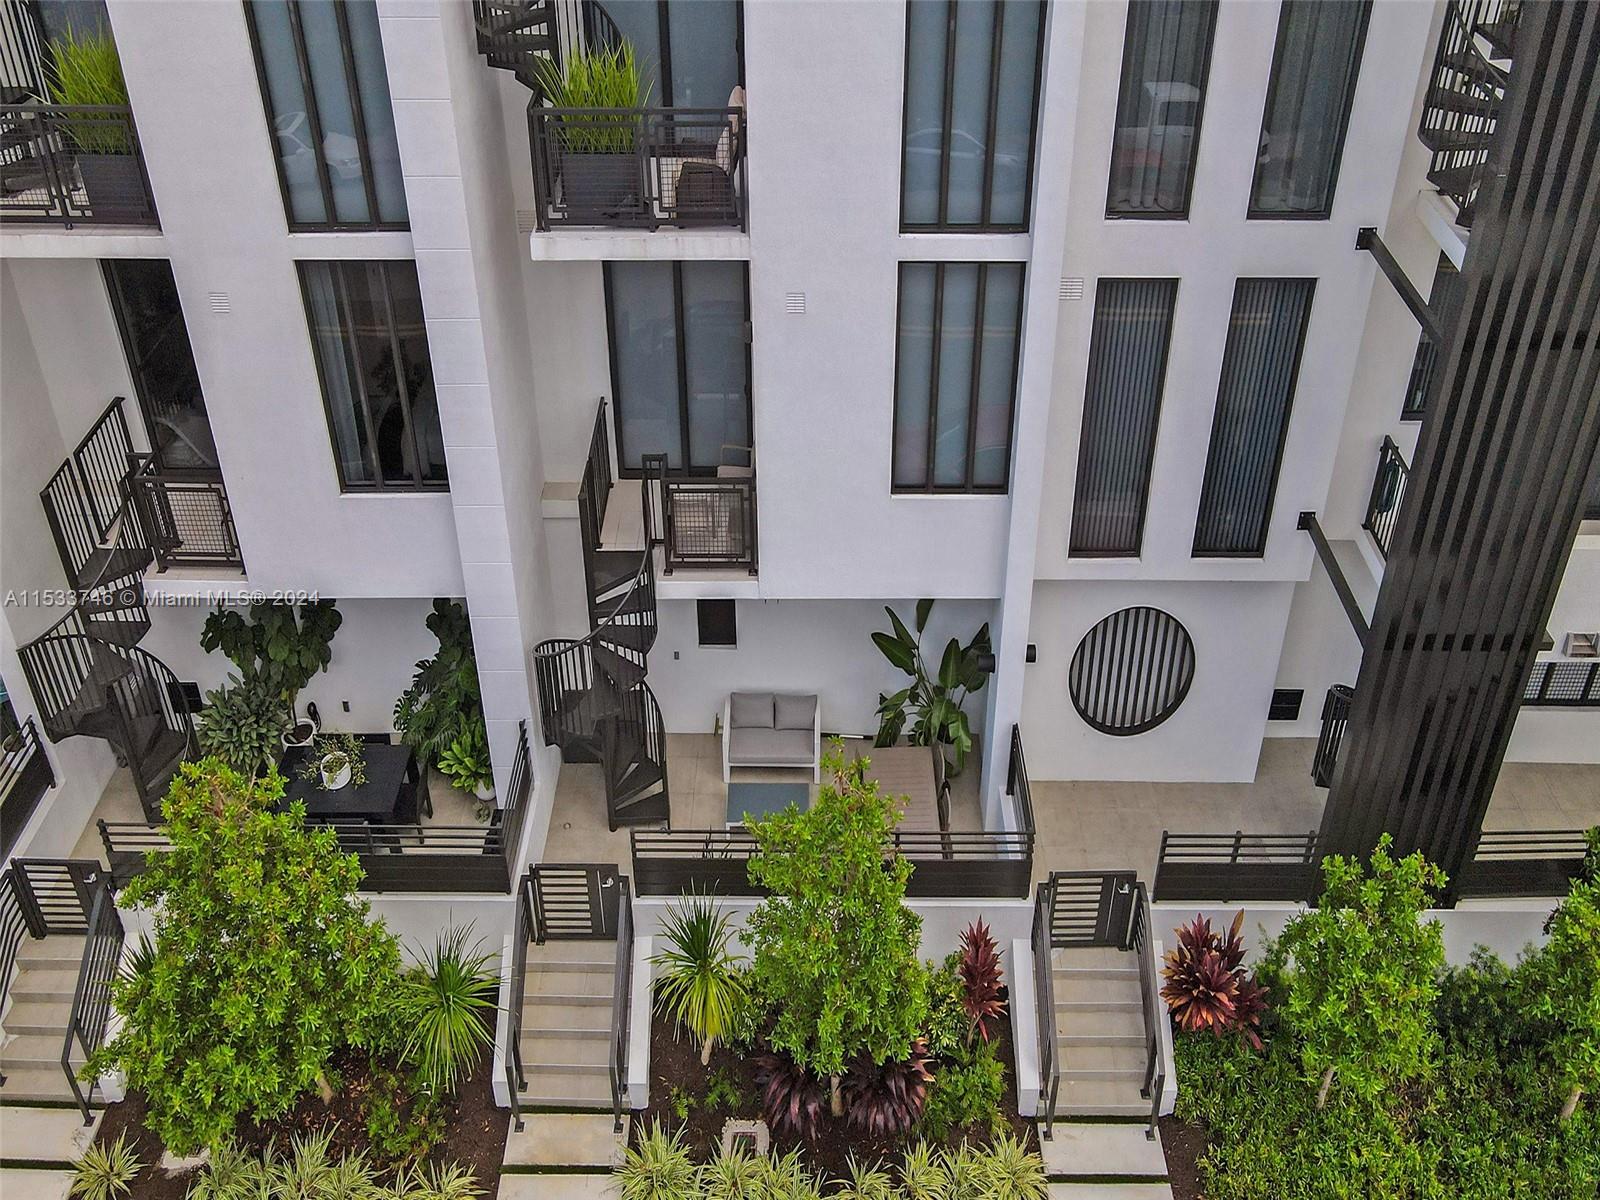 Ten30 is South Beaches new boutique community. This elegant second-floor residence boasts, large private terrace with separate entrance and additional balcony off living room, 2 parking spaces, 11-foot ceilings, a suite of Samsung smart appliances that redefine modern living. Luxury meets innovation with an Ecobee smart thermostat and a Latch keyless entry lock. Revel in the indulgence of a rainfall shower and anti-fog illuminated bathroom mirrors, while a custom walk-in closet maximizes your organizational aspirations. Previously owner-occupied for only a few months, this unit maintains its pristine condition. *Turn-key option - Alternatively, available fully furnished and adorned with top-tier designer furnishings. Simply bring your toothbrush or an ideal furnished rental investment.